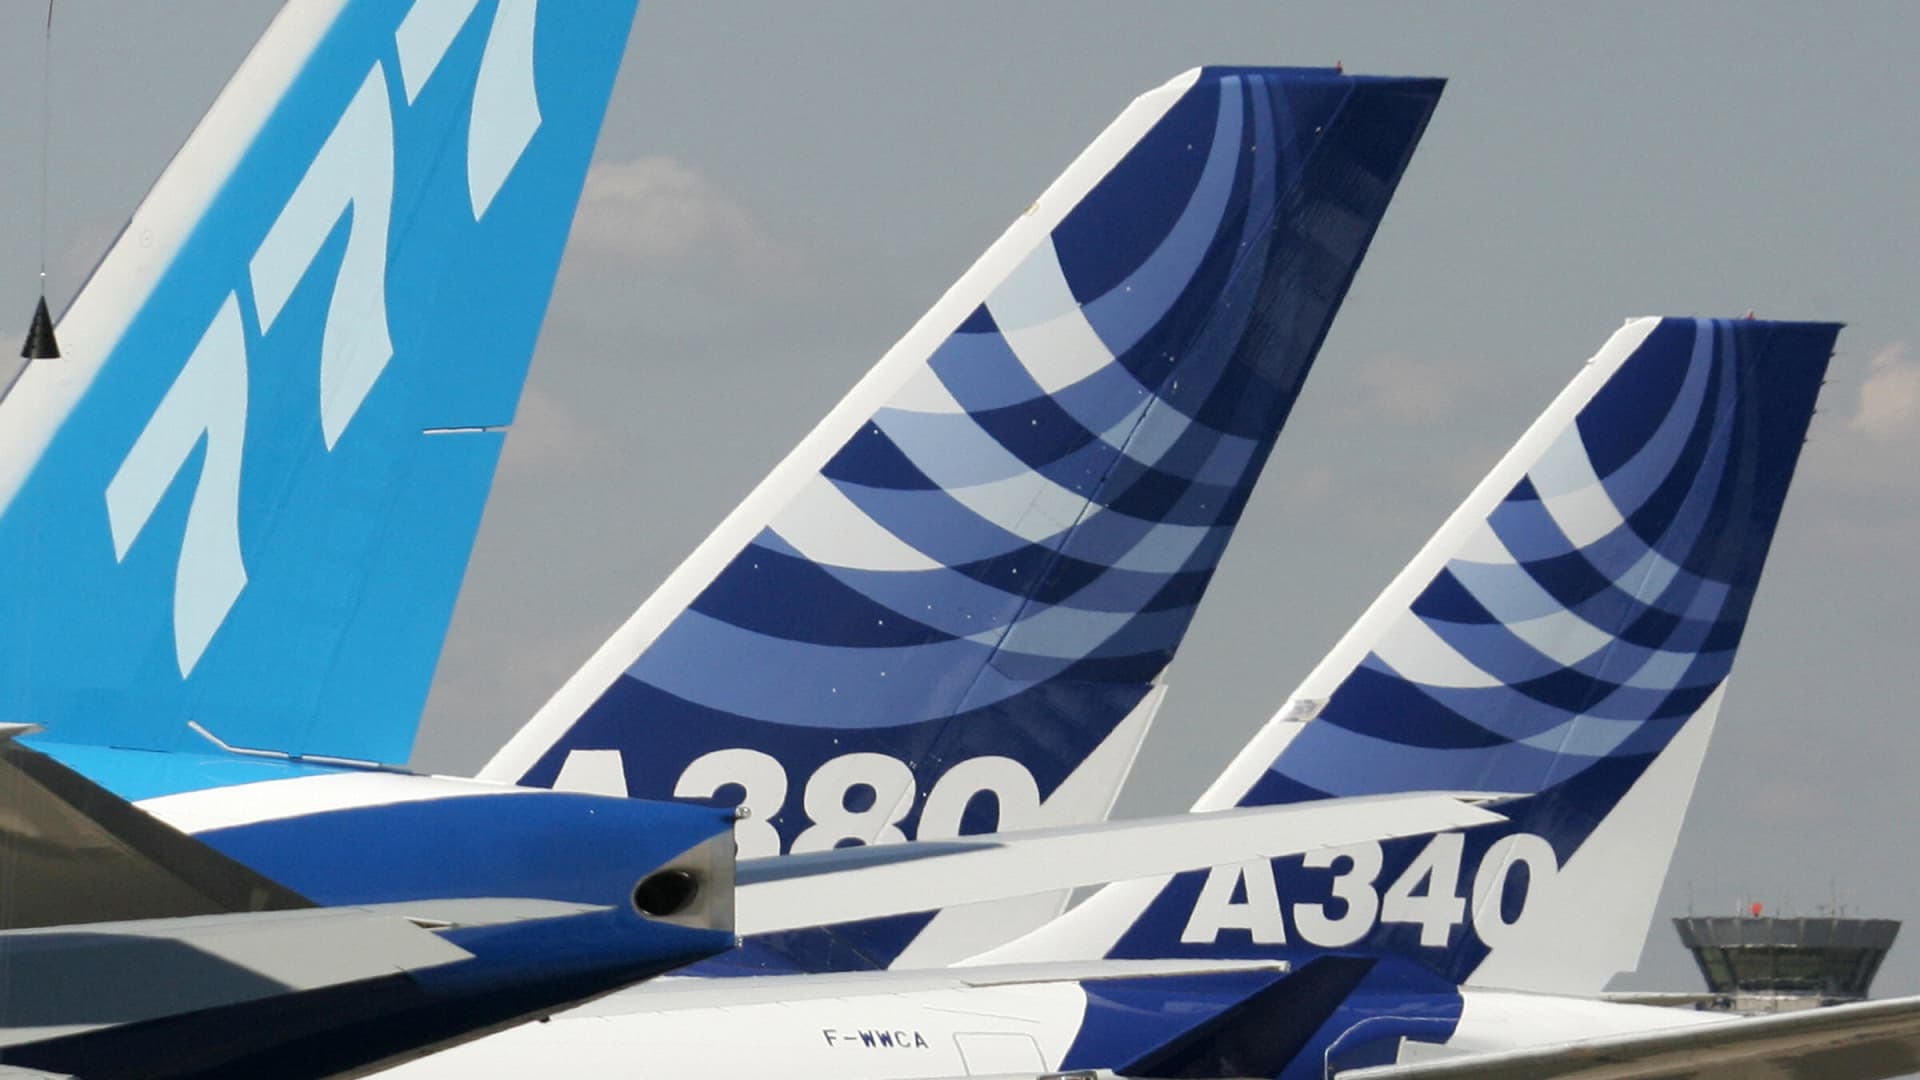 Airbus says it's 'not happy' about issues at rival Boeing